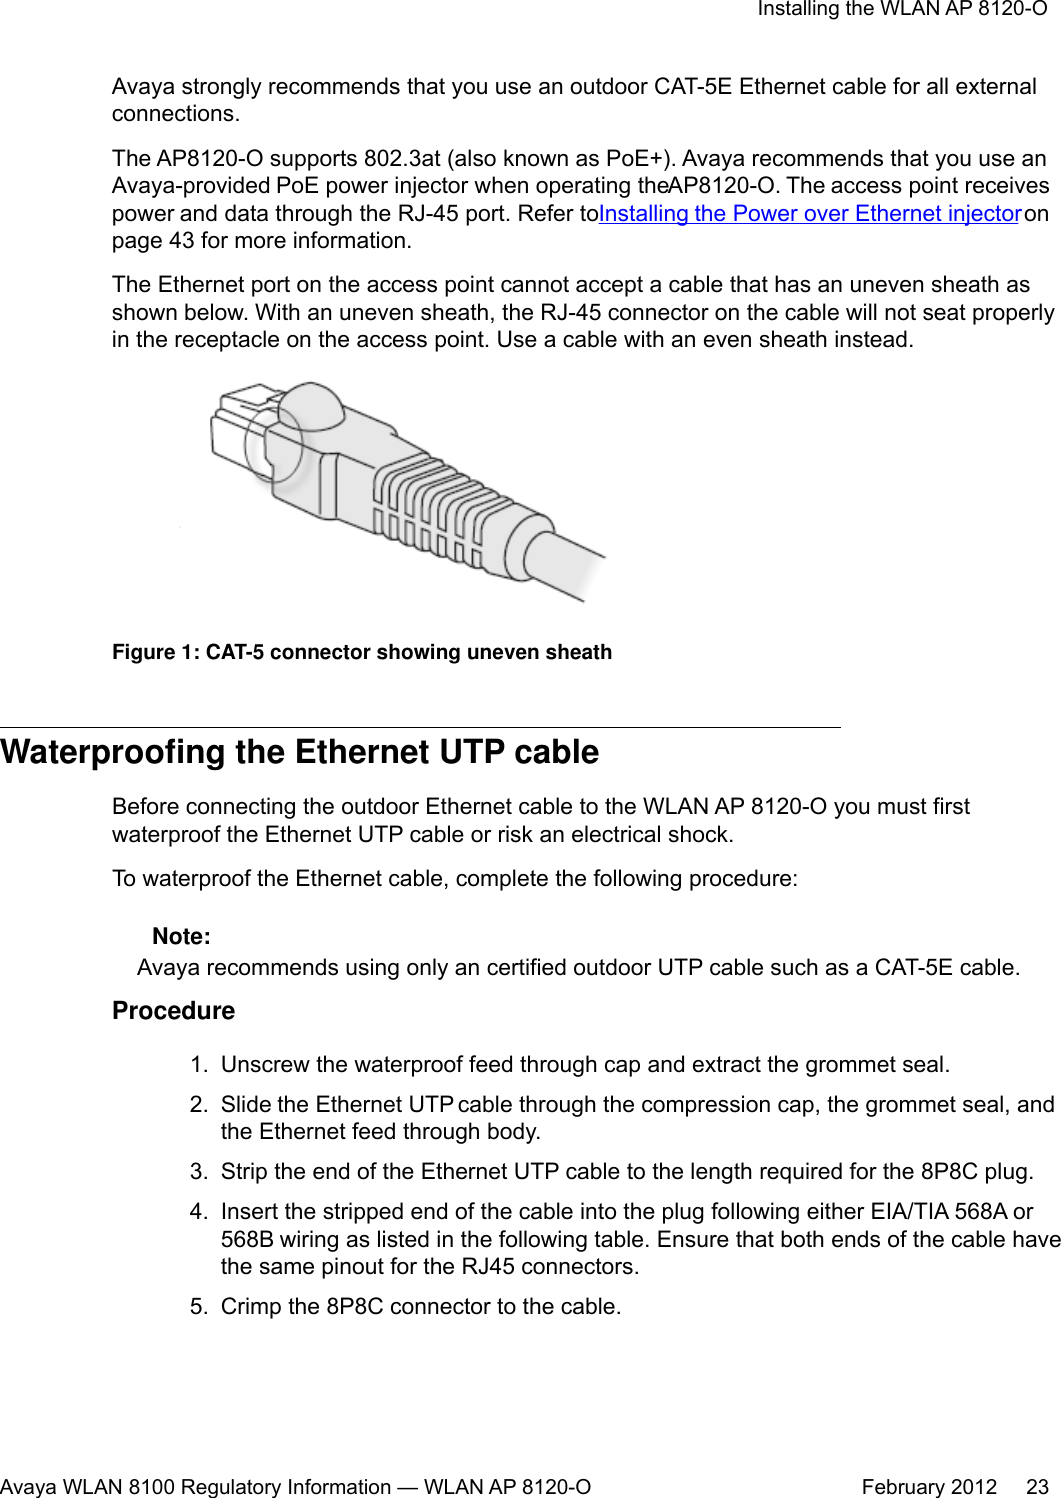 Avaya strongly recommends that you use an outdoor CAT-5E Ethernet cable for all externalconnections.The AP8120-O supports 802.3at (also known as PoE+). Avaya recommends that you use anAvaya-provided PoE power injector when operating the AP8120-O. The access point receivespower and data through the RJ-45 port. Refer to Installing the Power over Ethernet injector onpage 43 for more information.The Ethernet port on the access point cannot accept a cable that has an uneven sheath asshown below. With an uneven sheath, the RJ-45 connector on the cable will not seat properlyin the receptacle on the access point. Use a cable with an even sheath instead.Figure 1: CAT-5 connector showing uneven sheathWaterproofing the Ethernet UTP cableBefore connecting the outdoor Ethernet cable to the WLAN AP 8120-O you must firstwaterproof the Ethernet UTP cable or risk an electrical shock.To waterproof the Ethernet cable, complete the following procedure: Note:Avaya recommends using only an certified outdoor UTP cable such as a CAT-5E cable.Procedure1. Unscrew the waterproof feed through cap and extract the grommet seal.2. Slide the Ethernet UTP cable through the compression cap, the grommet seal, andthe Ethernet feed through body.3. Strip the end of the Ethernet UTP cable to the length required for the 8P8C plug.4. Insert the stripped end of the cable into the plug following either EIA/TIA 568A or568B wiring as listed in the following table. Ensure that both ends of the cable havethe same pinout for the RJ45 connectors.5. Crimp the 8P8C connector to the cable.Installing the WLAN AP 8120-OAvaya WLAN 8100 Regulatory Information — WLAN AP 8120-O February 2012     23